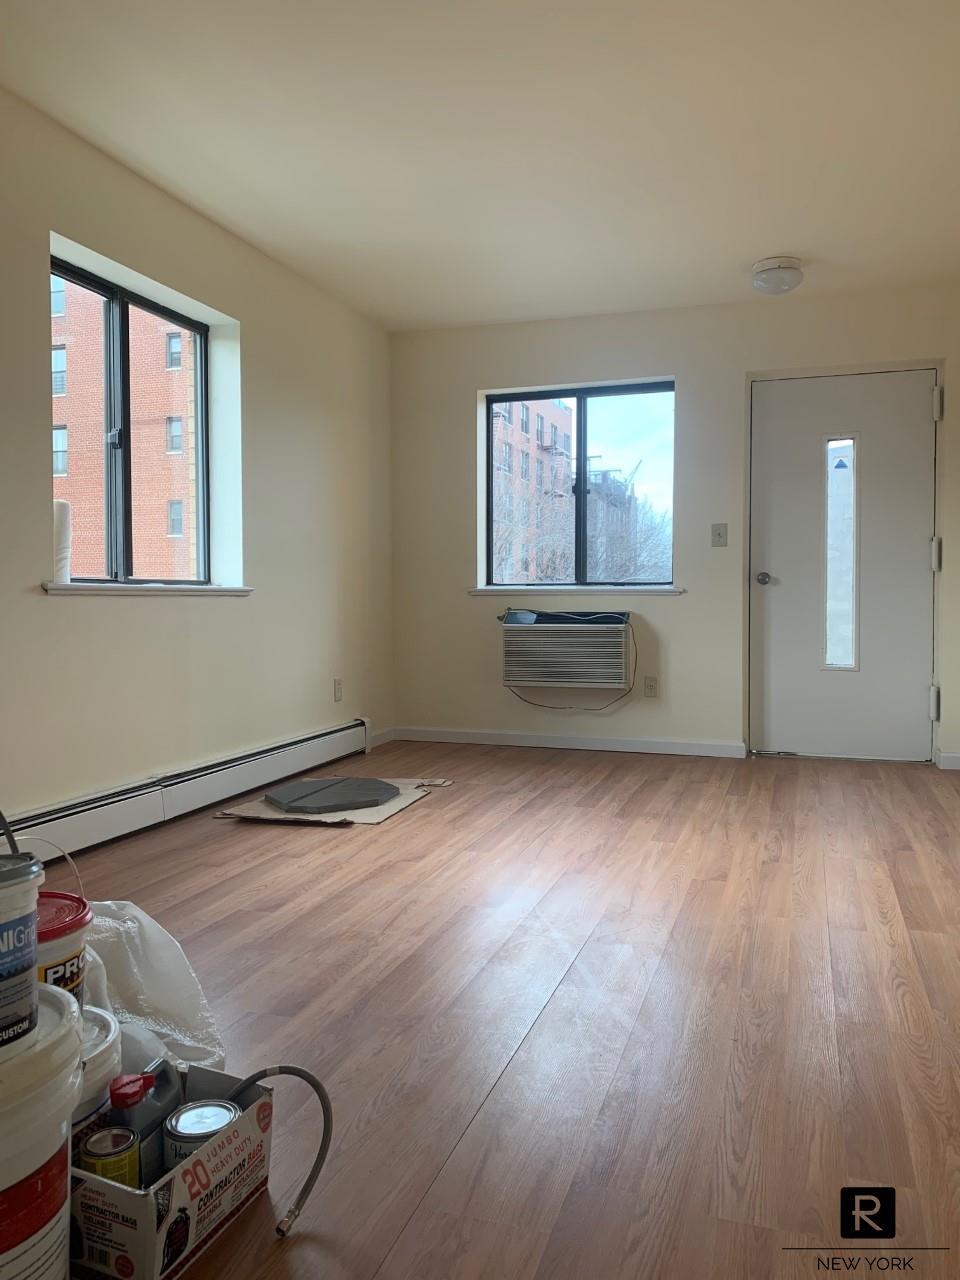 68-03 41st Avenue Woodside Queens NY 11377